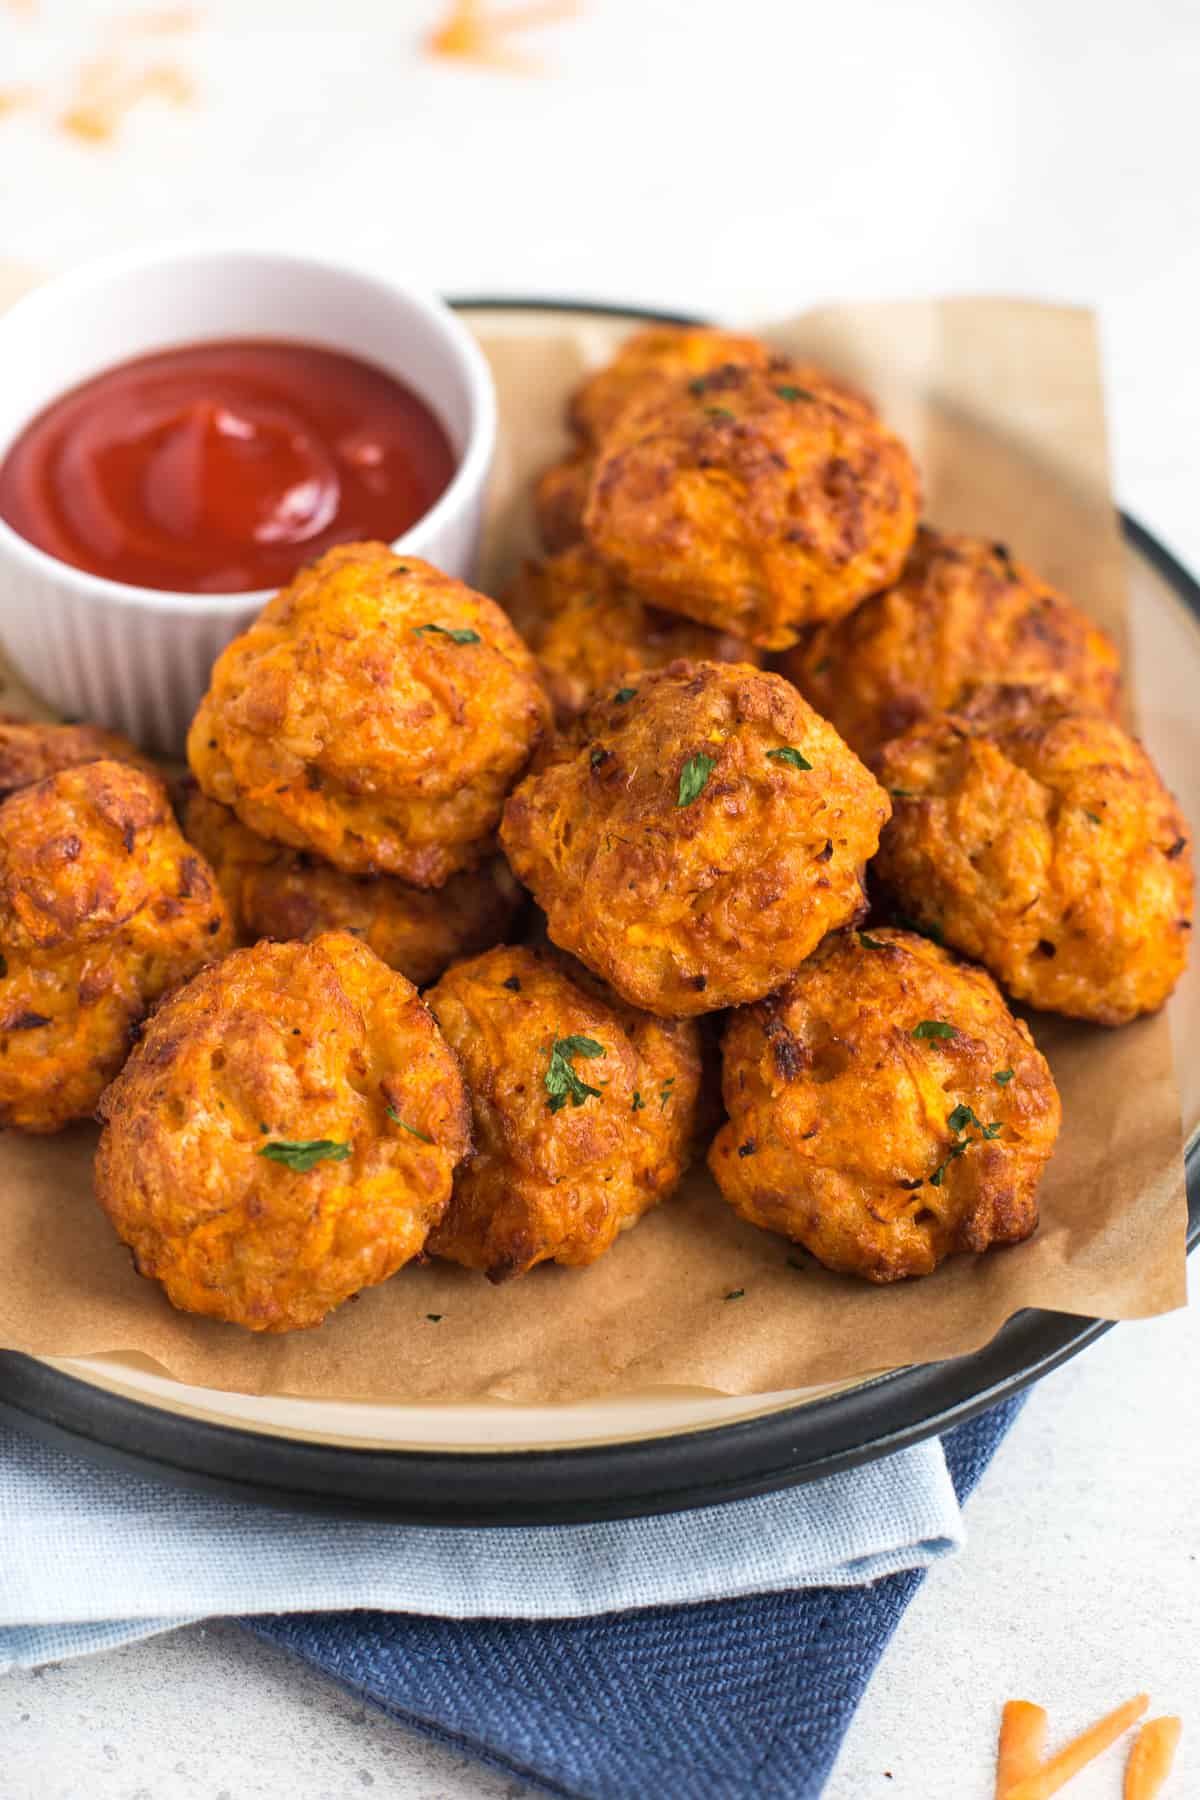 Cheesy carrot bites on a plate with ketchup.